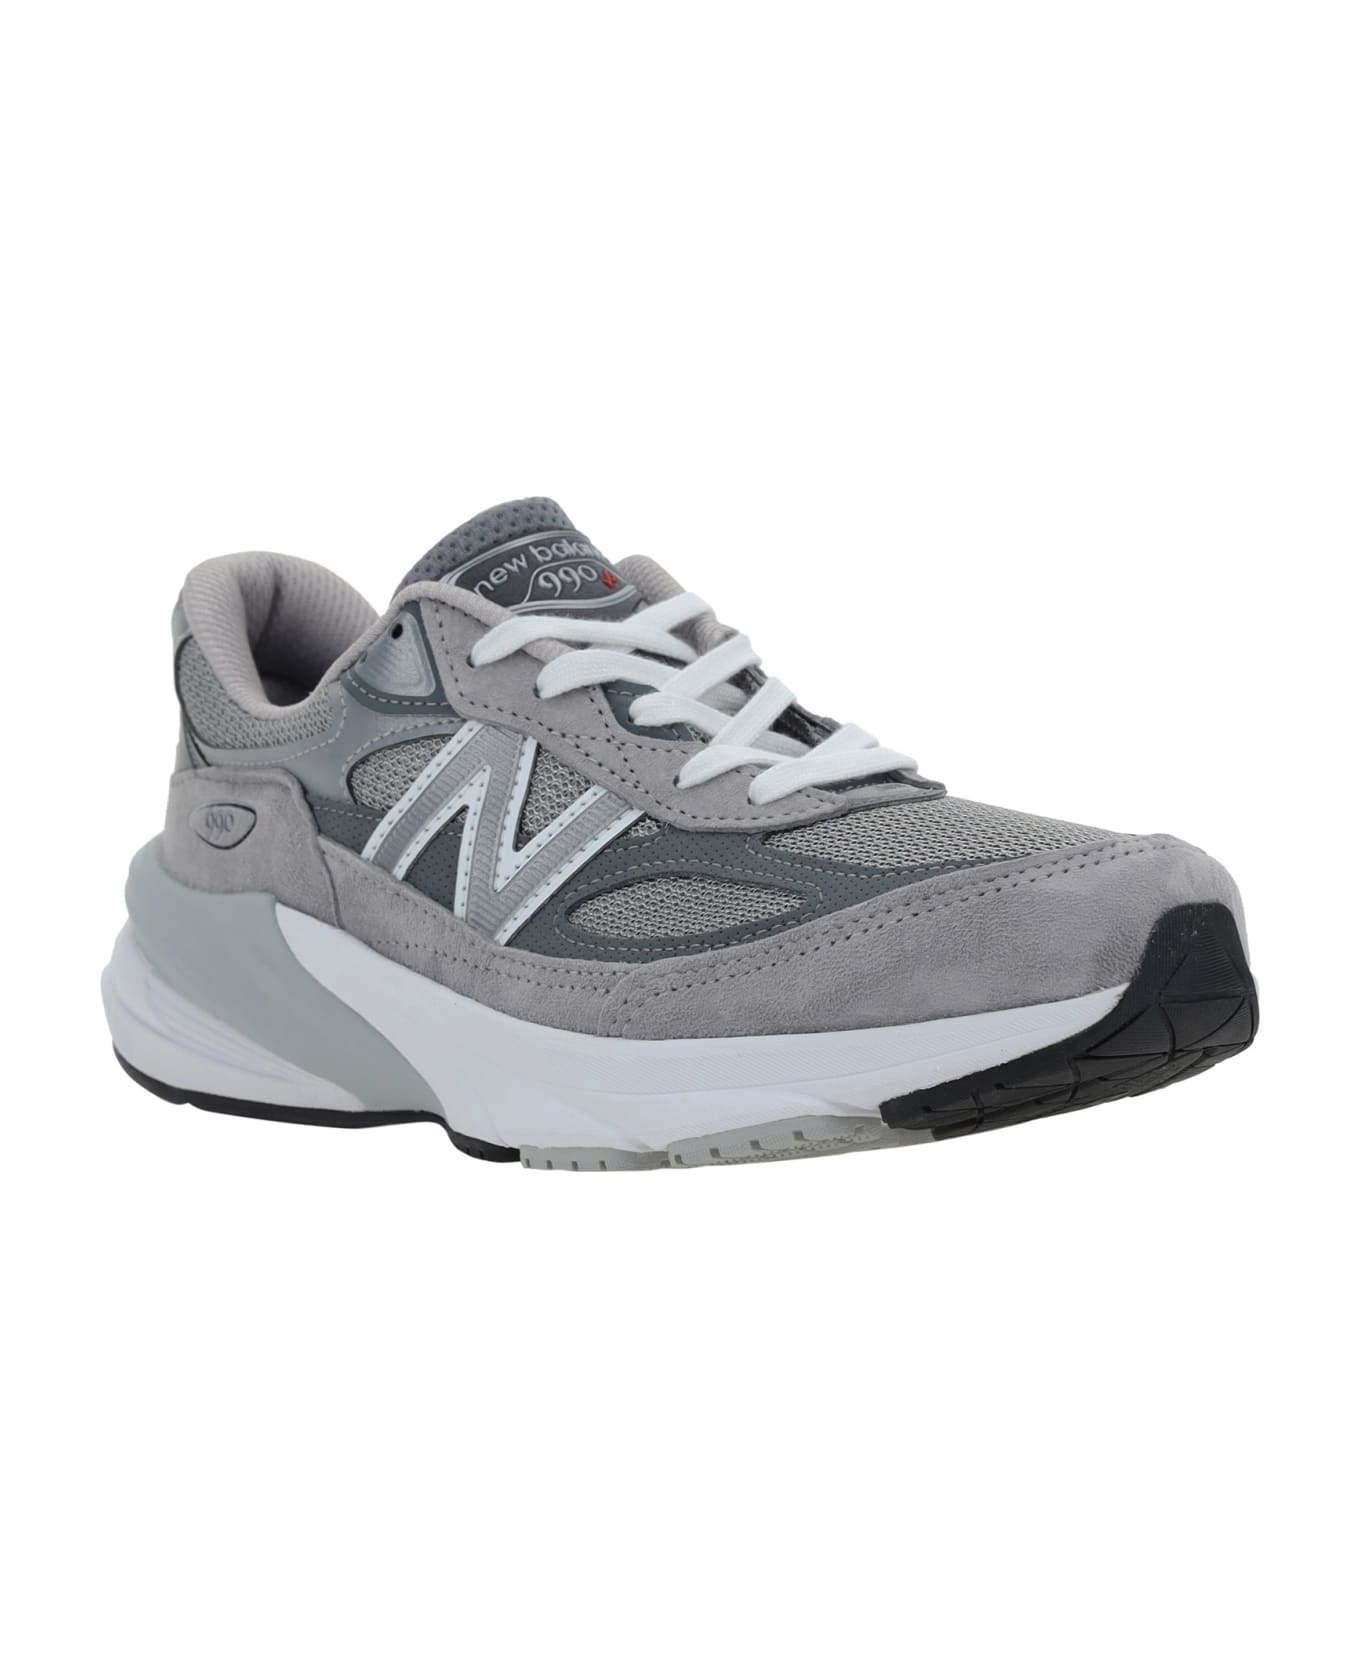 New Balance Lifestyle Sneakers - Cool